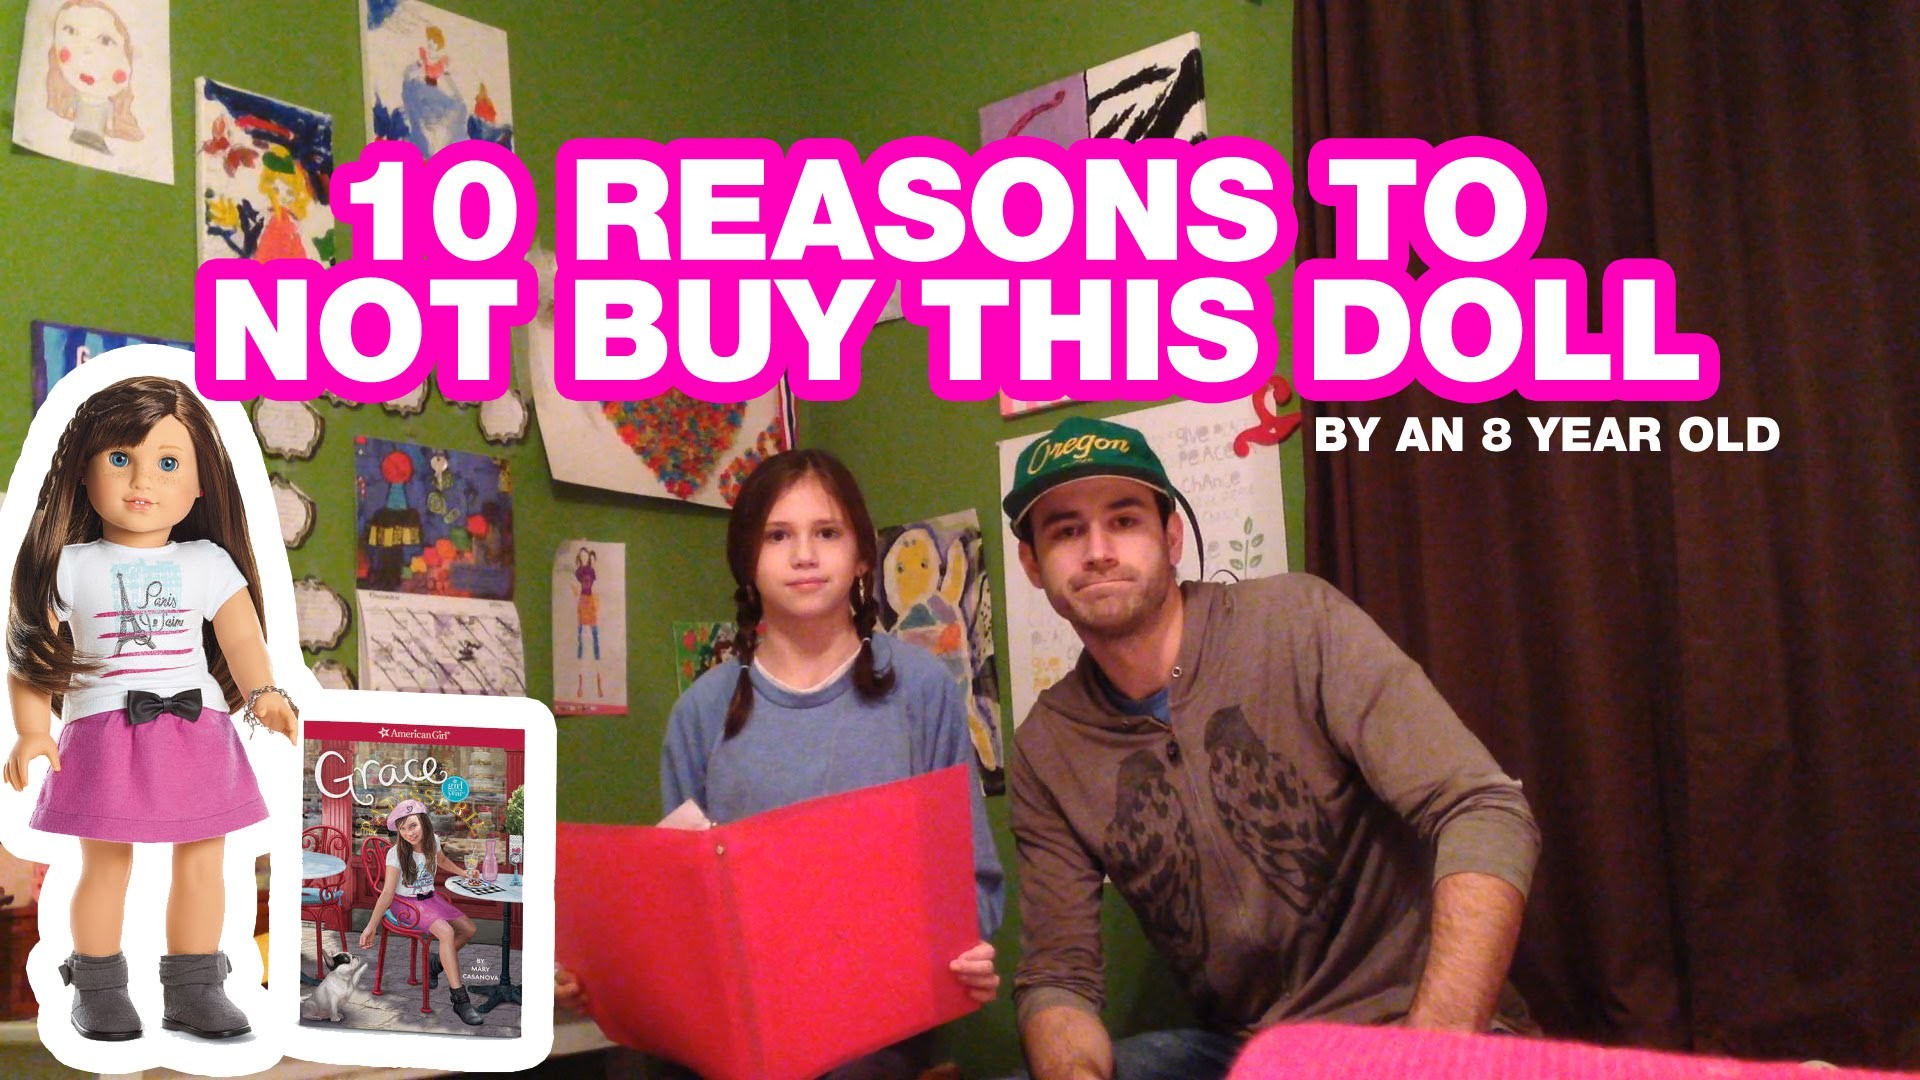 1920x1080 10 Reasons to NOT buy Grace Thomas 2015 American Girl Doll - by an 8 Year  old girl. - YouTube